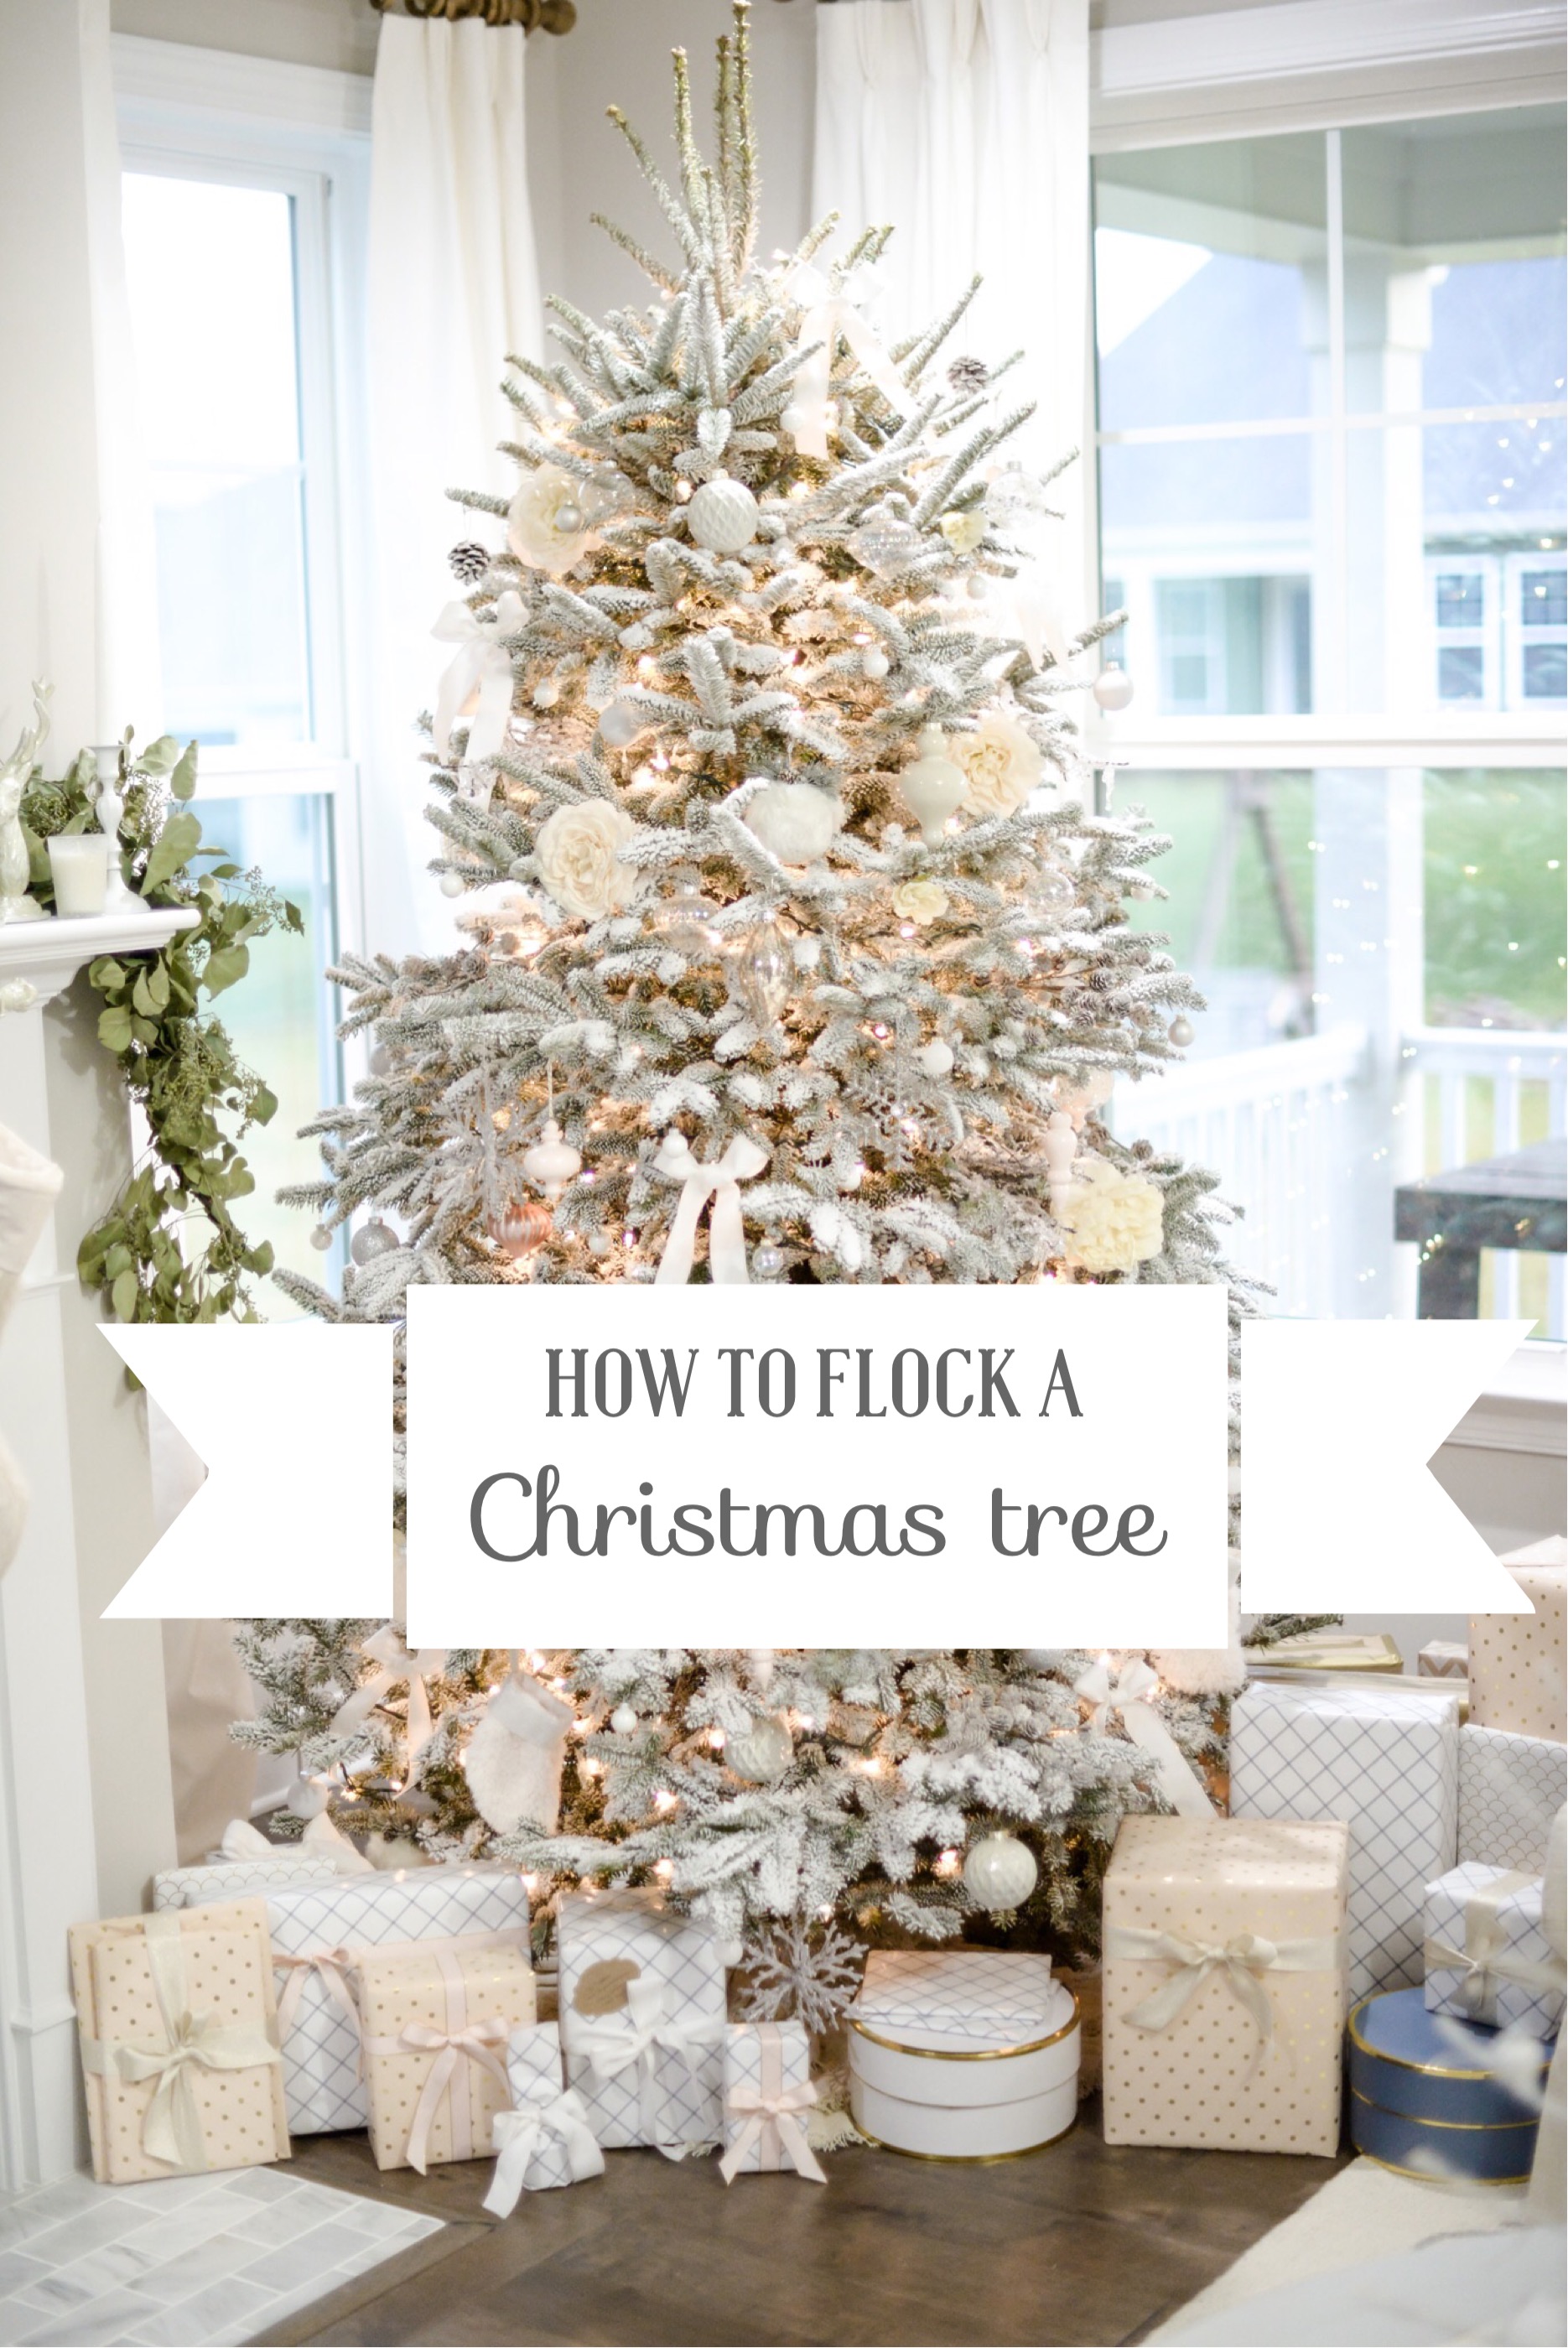 How to Flock a Christmas Tree  DIY Easy Steps to Flock a Christmas Tree